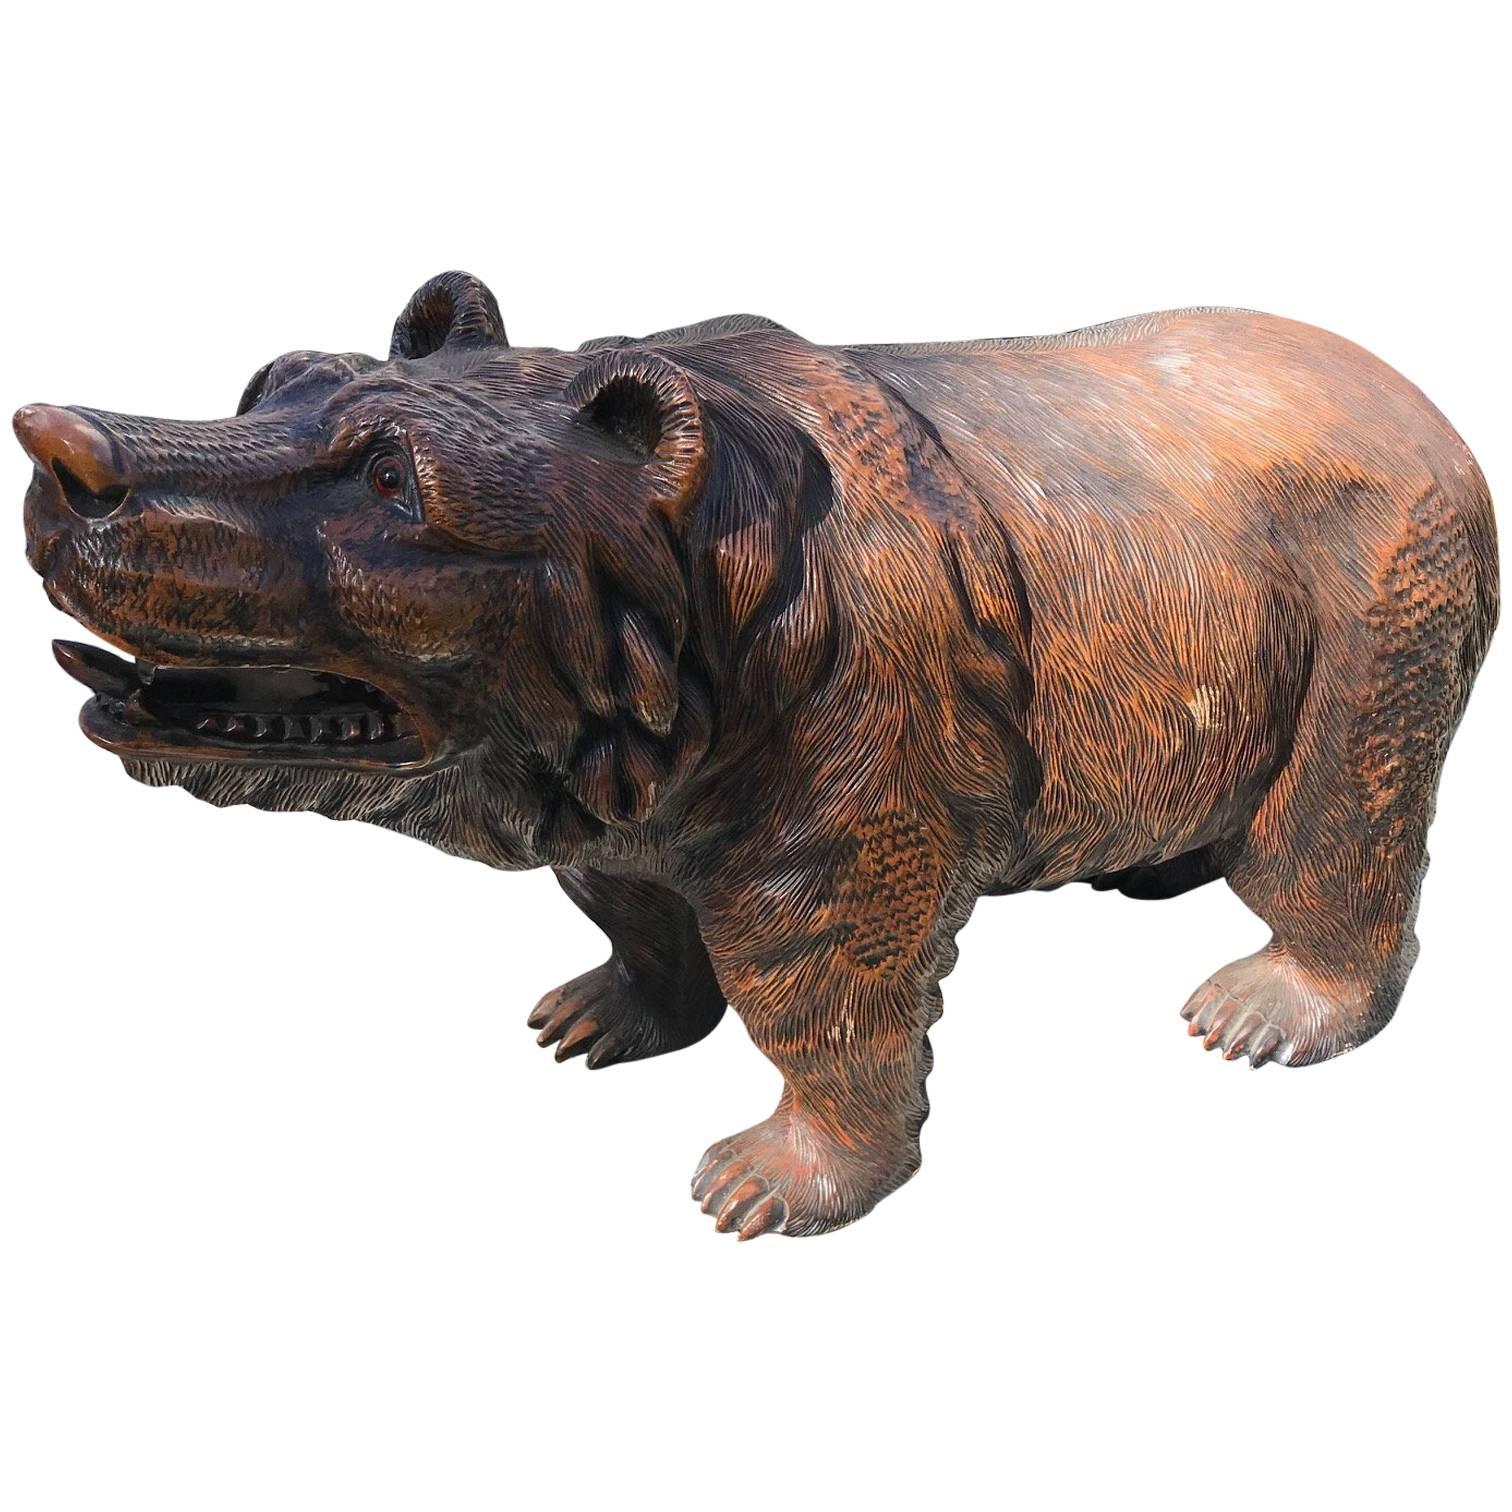 Japanese fine old handmade and hand-carved large-scale wooden carving of a bear Higuma, cryptomeria (cedar) wood and in large-scale, a large one 30 inches in length.

Quality: Hand-carved with rich and deep realistic hair lines (photo). Fine and